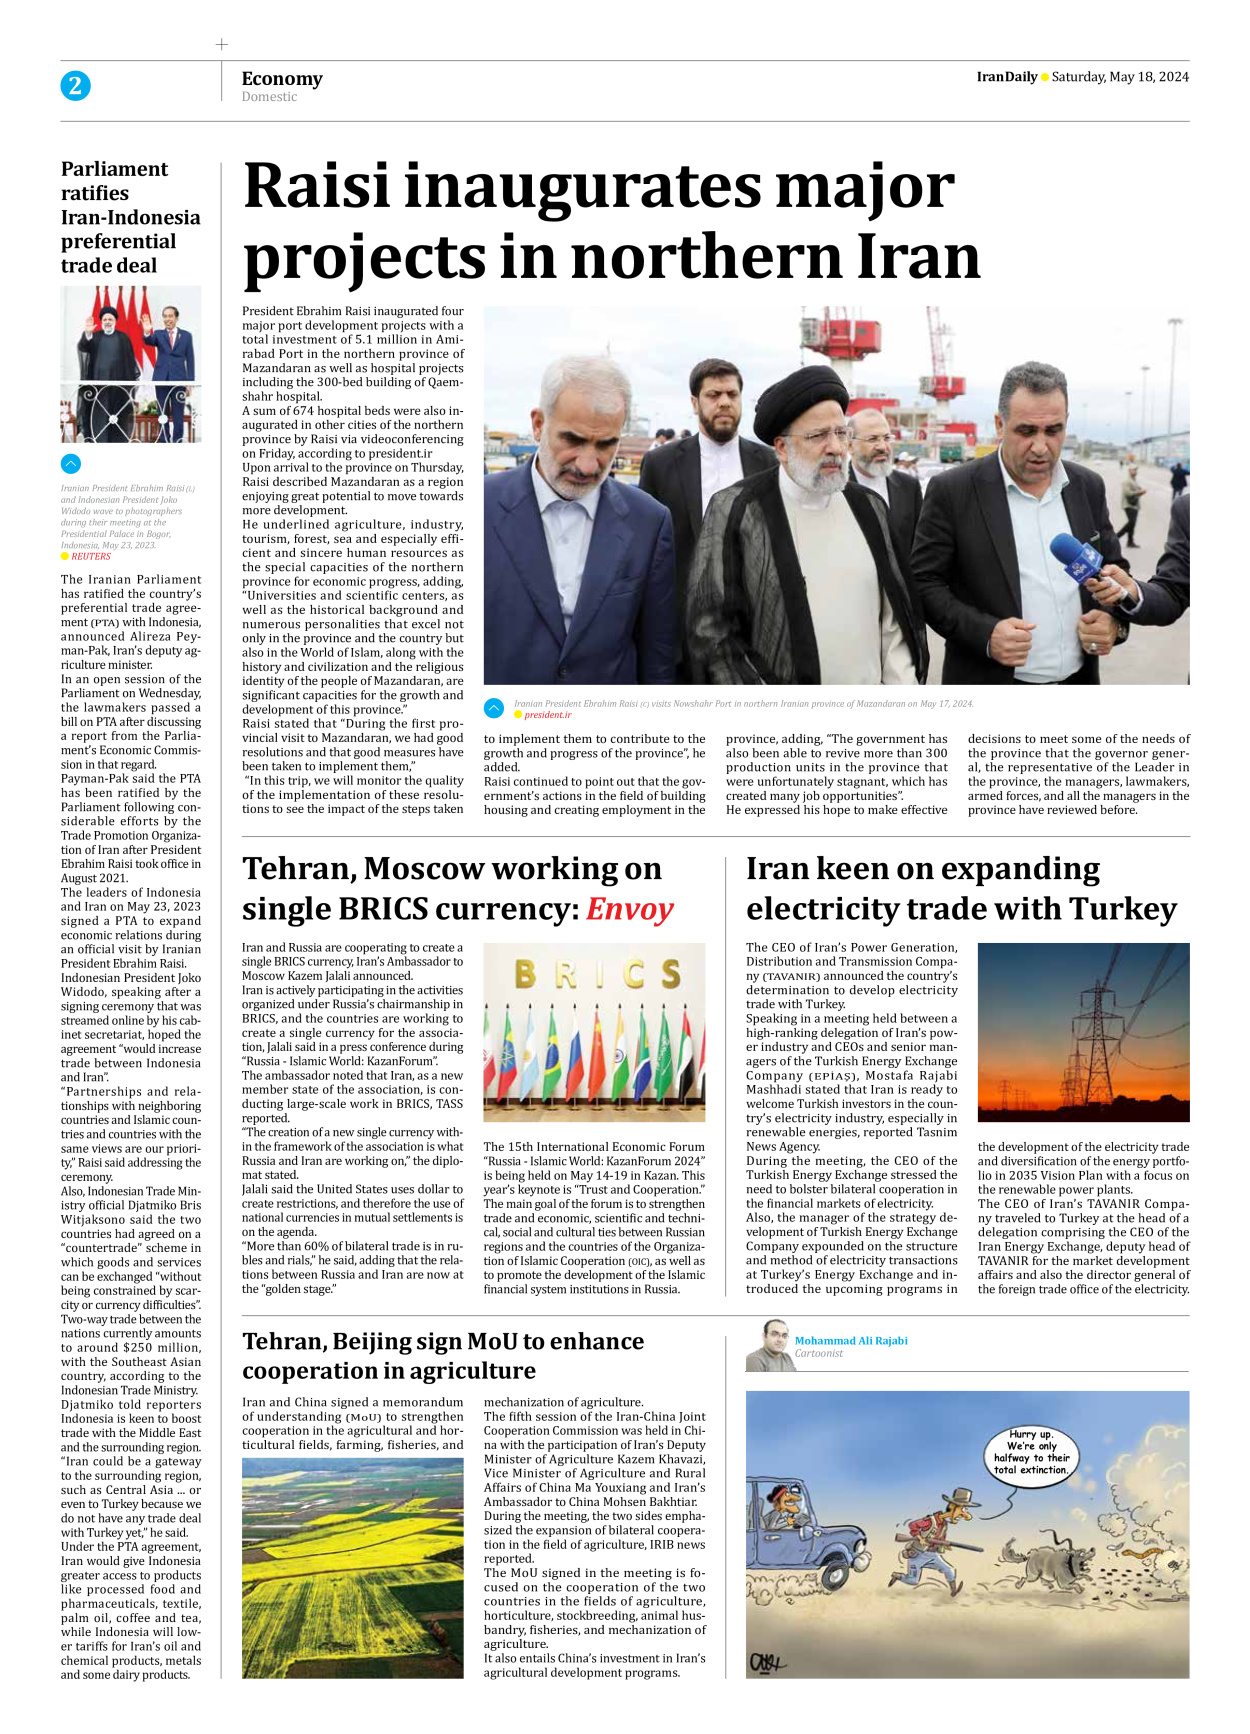 Iran Daily - Number Seven Thousand Five Hundred and Sixty - 18 May 2024 - Page 2